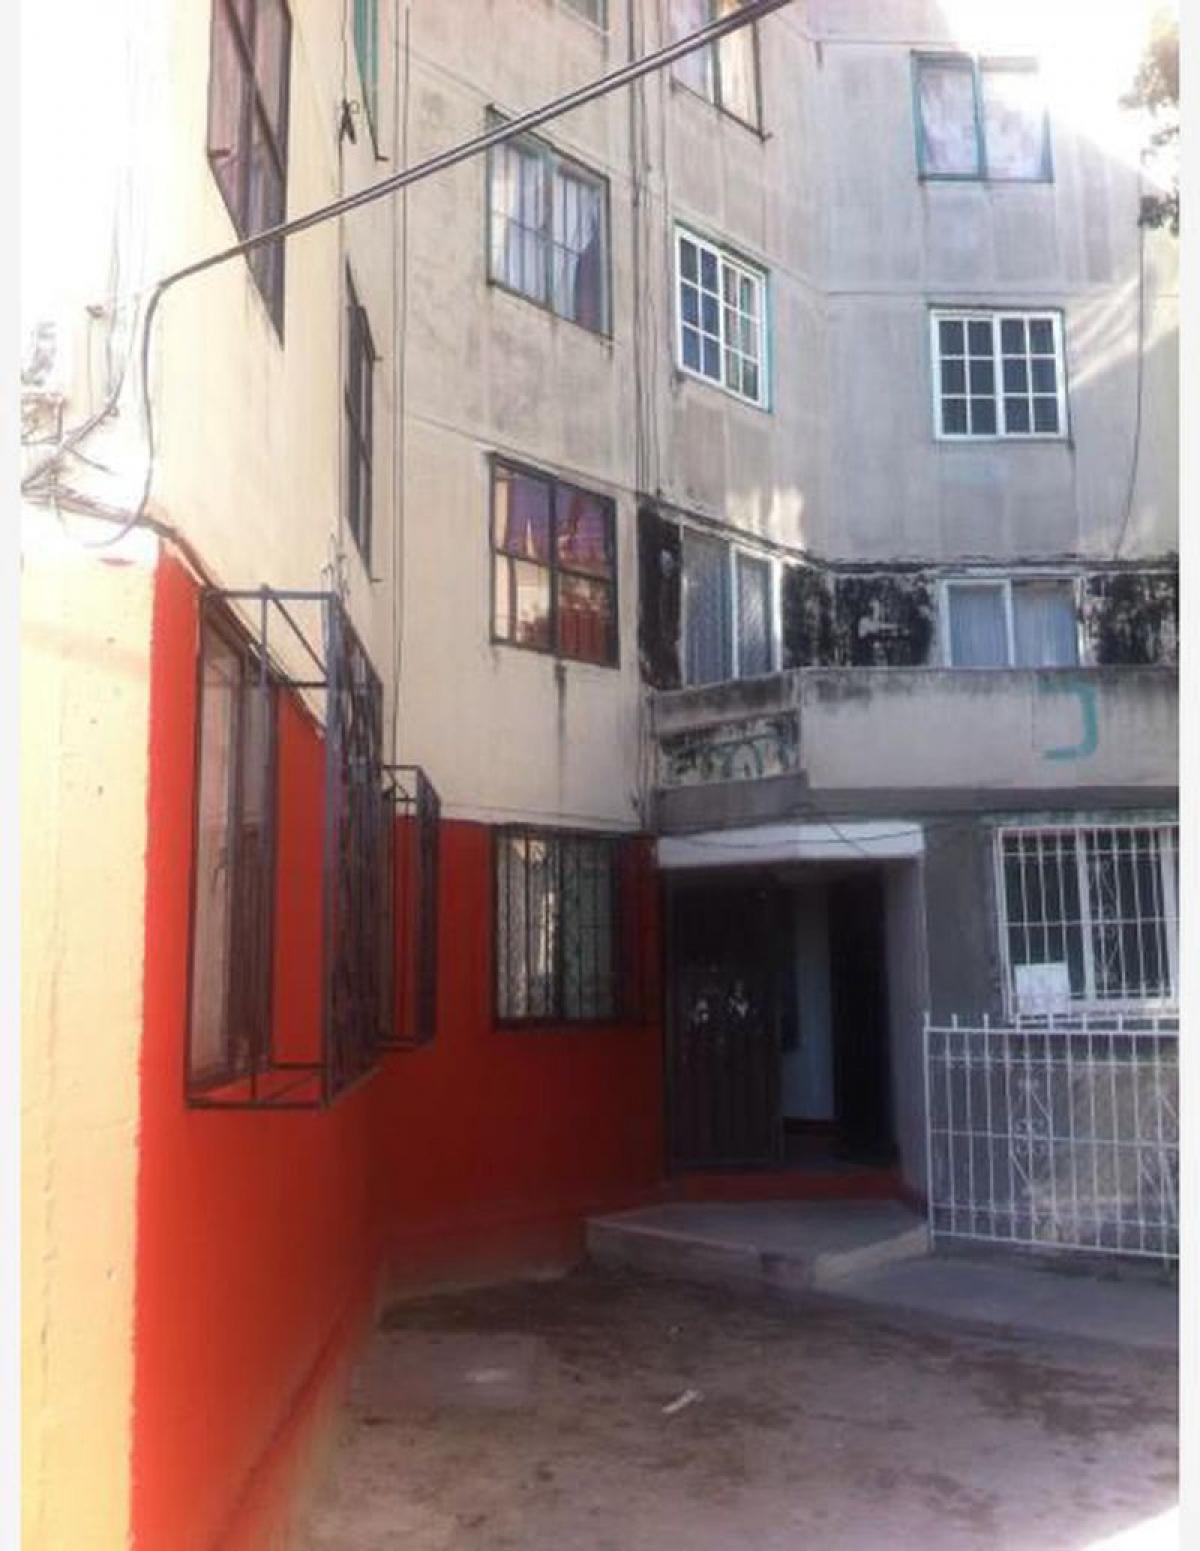 Picture of Apartment For Sale in Tultitlan, Mexico, Mexico